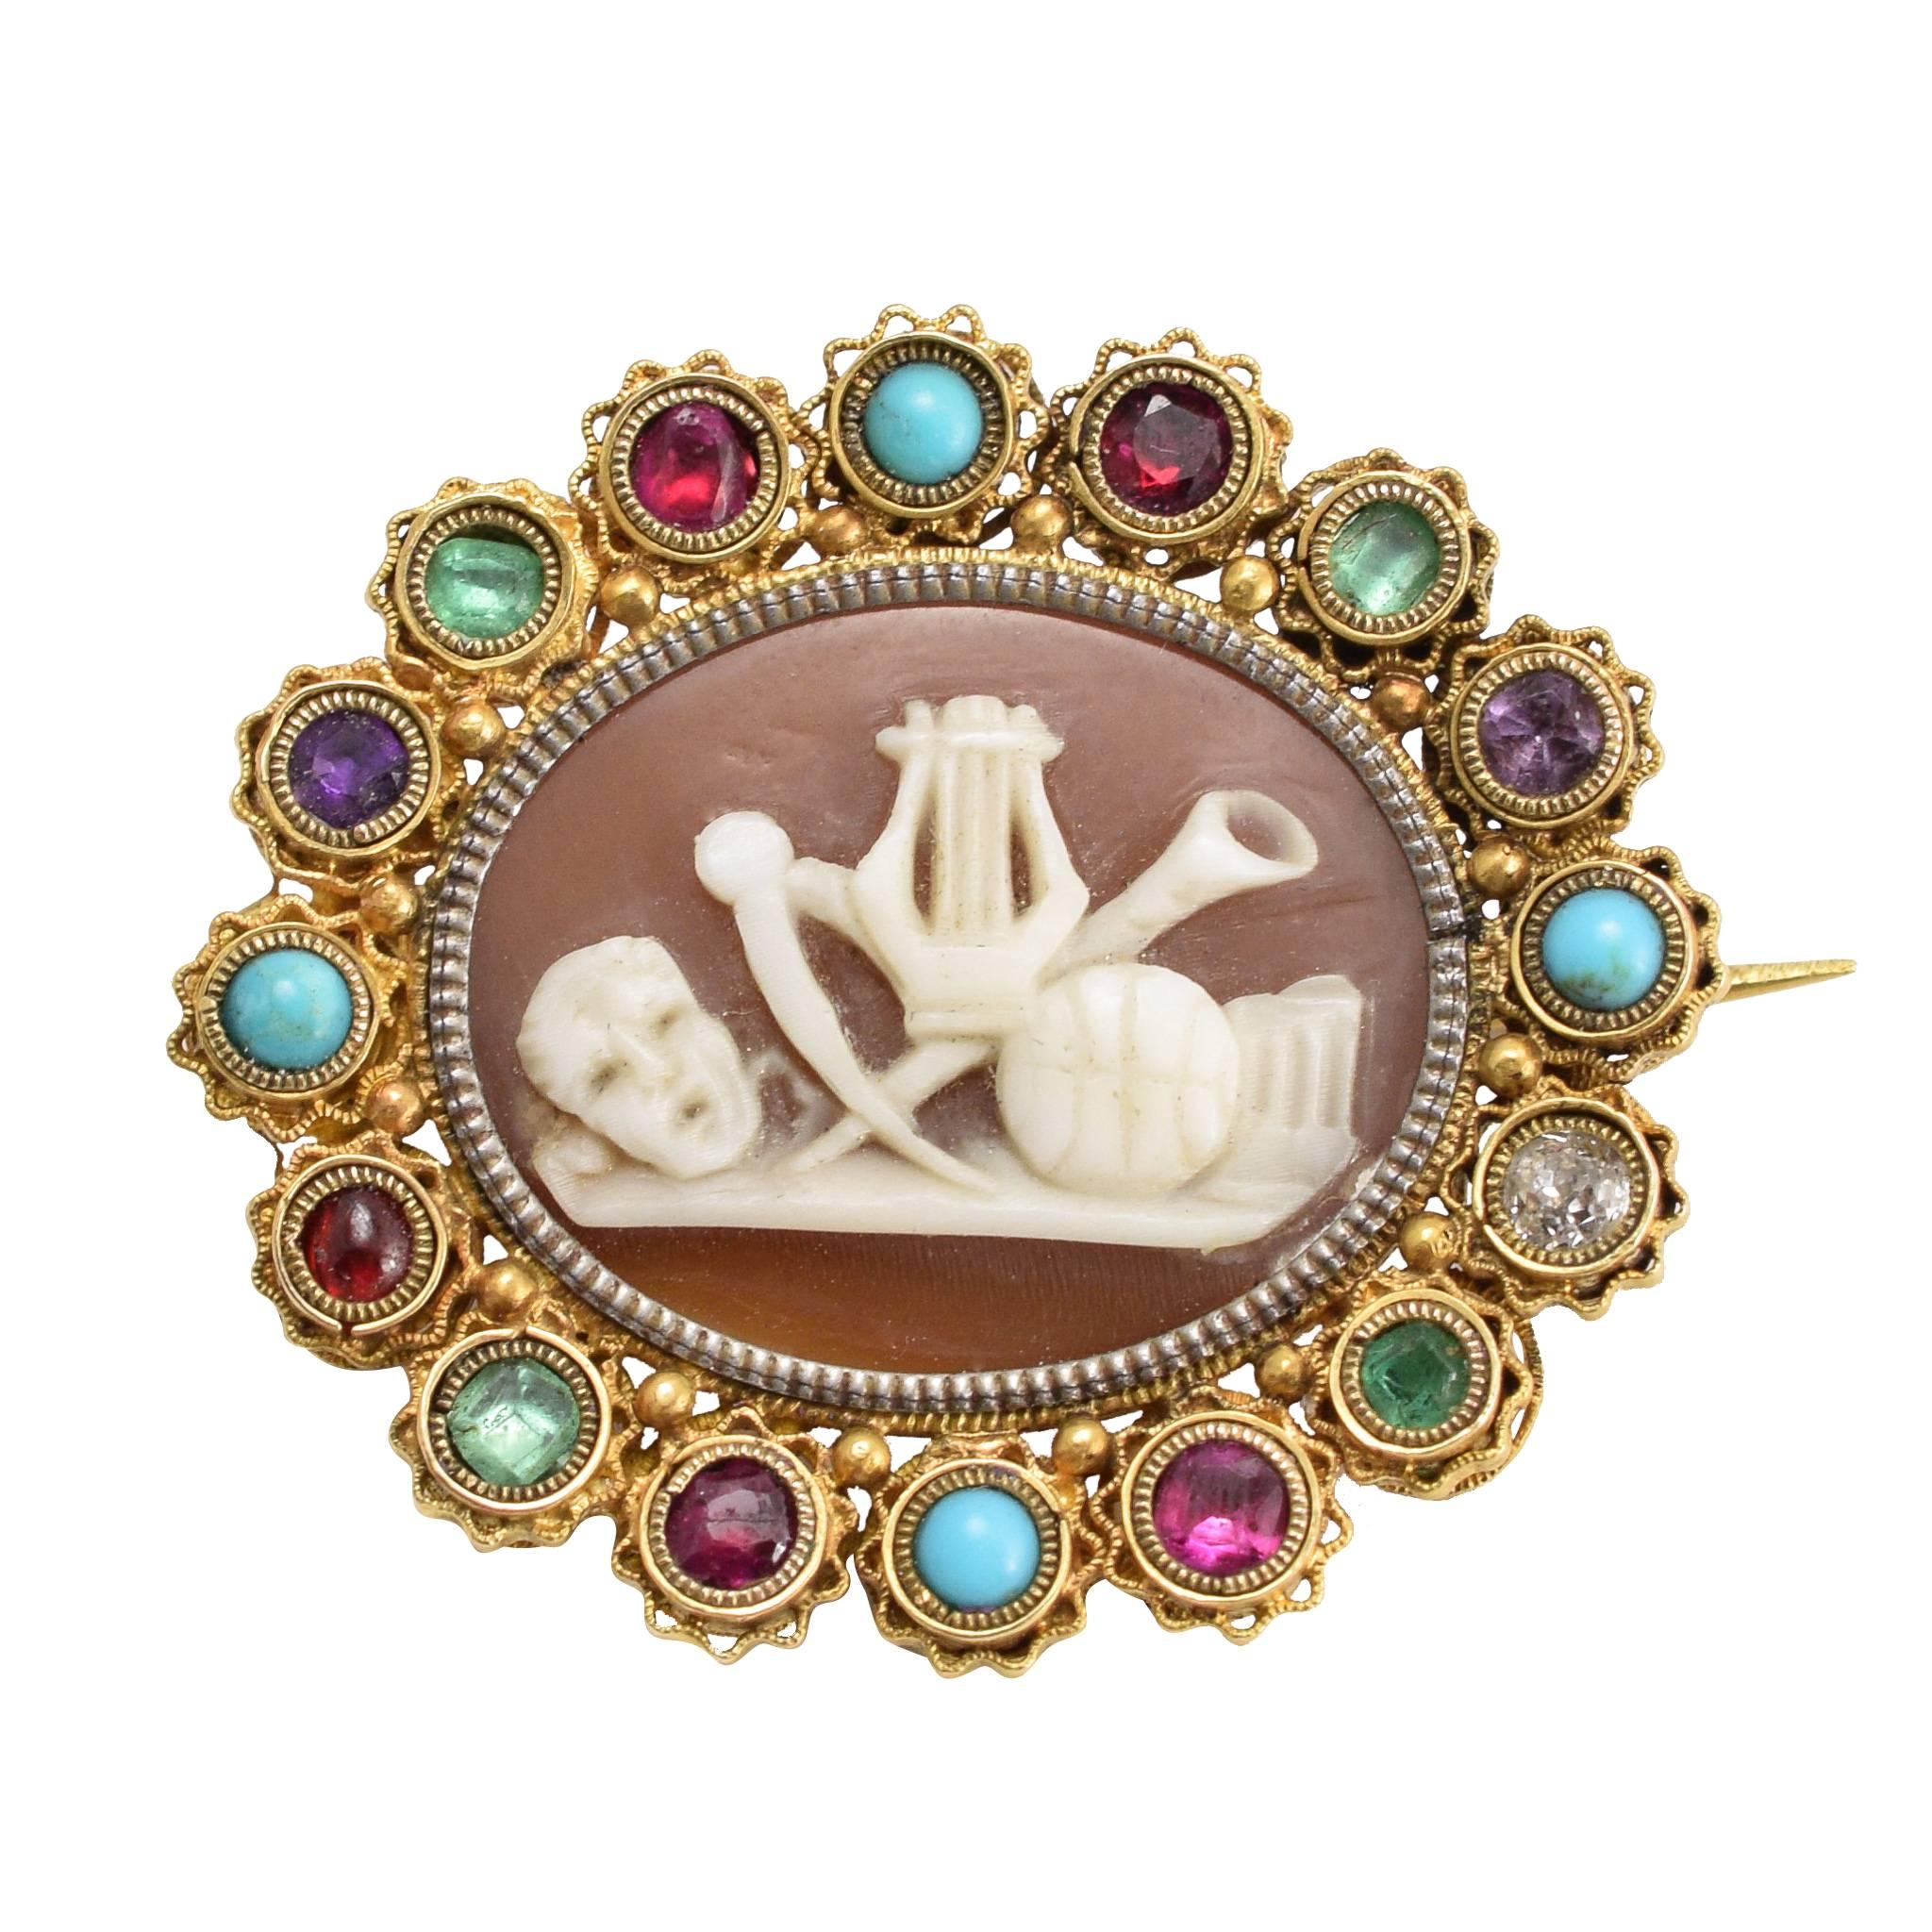 Regency Period Harlequin "Classical Muses" Cameo Brooch